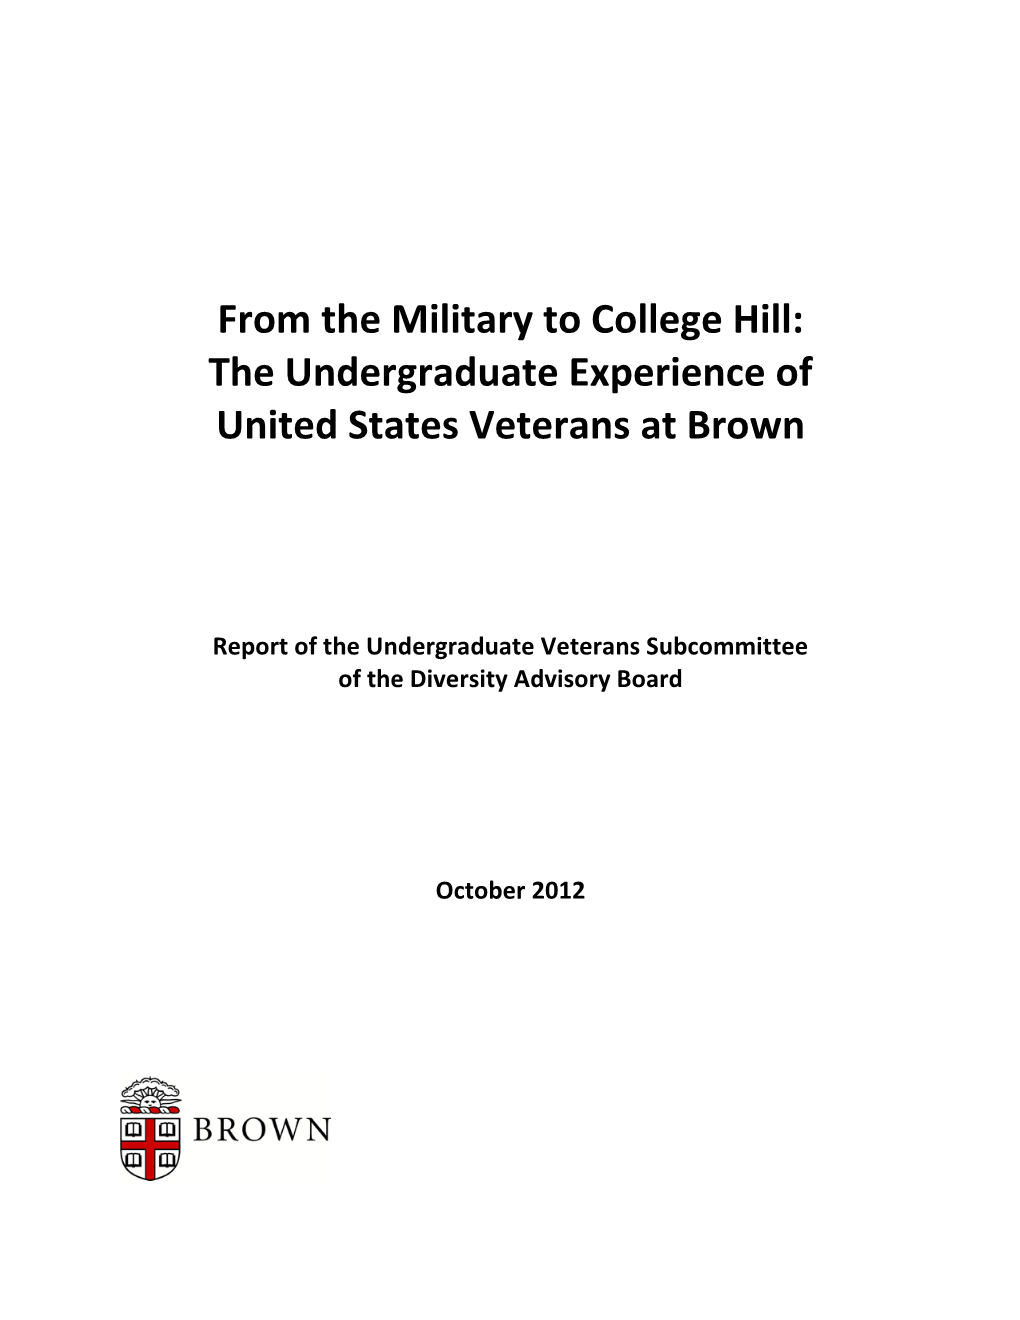 From the Military to College Hill: the Undergraduate Experience of United States Veterans at Brown